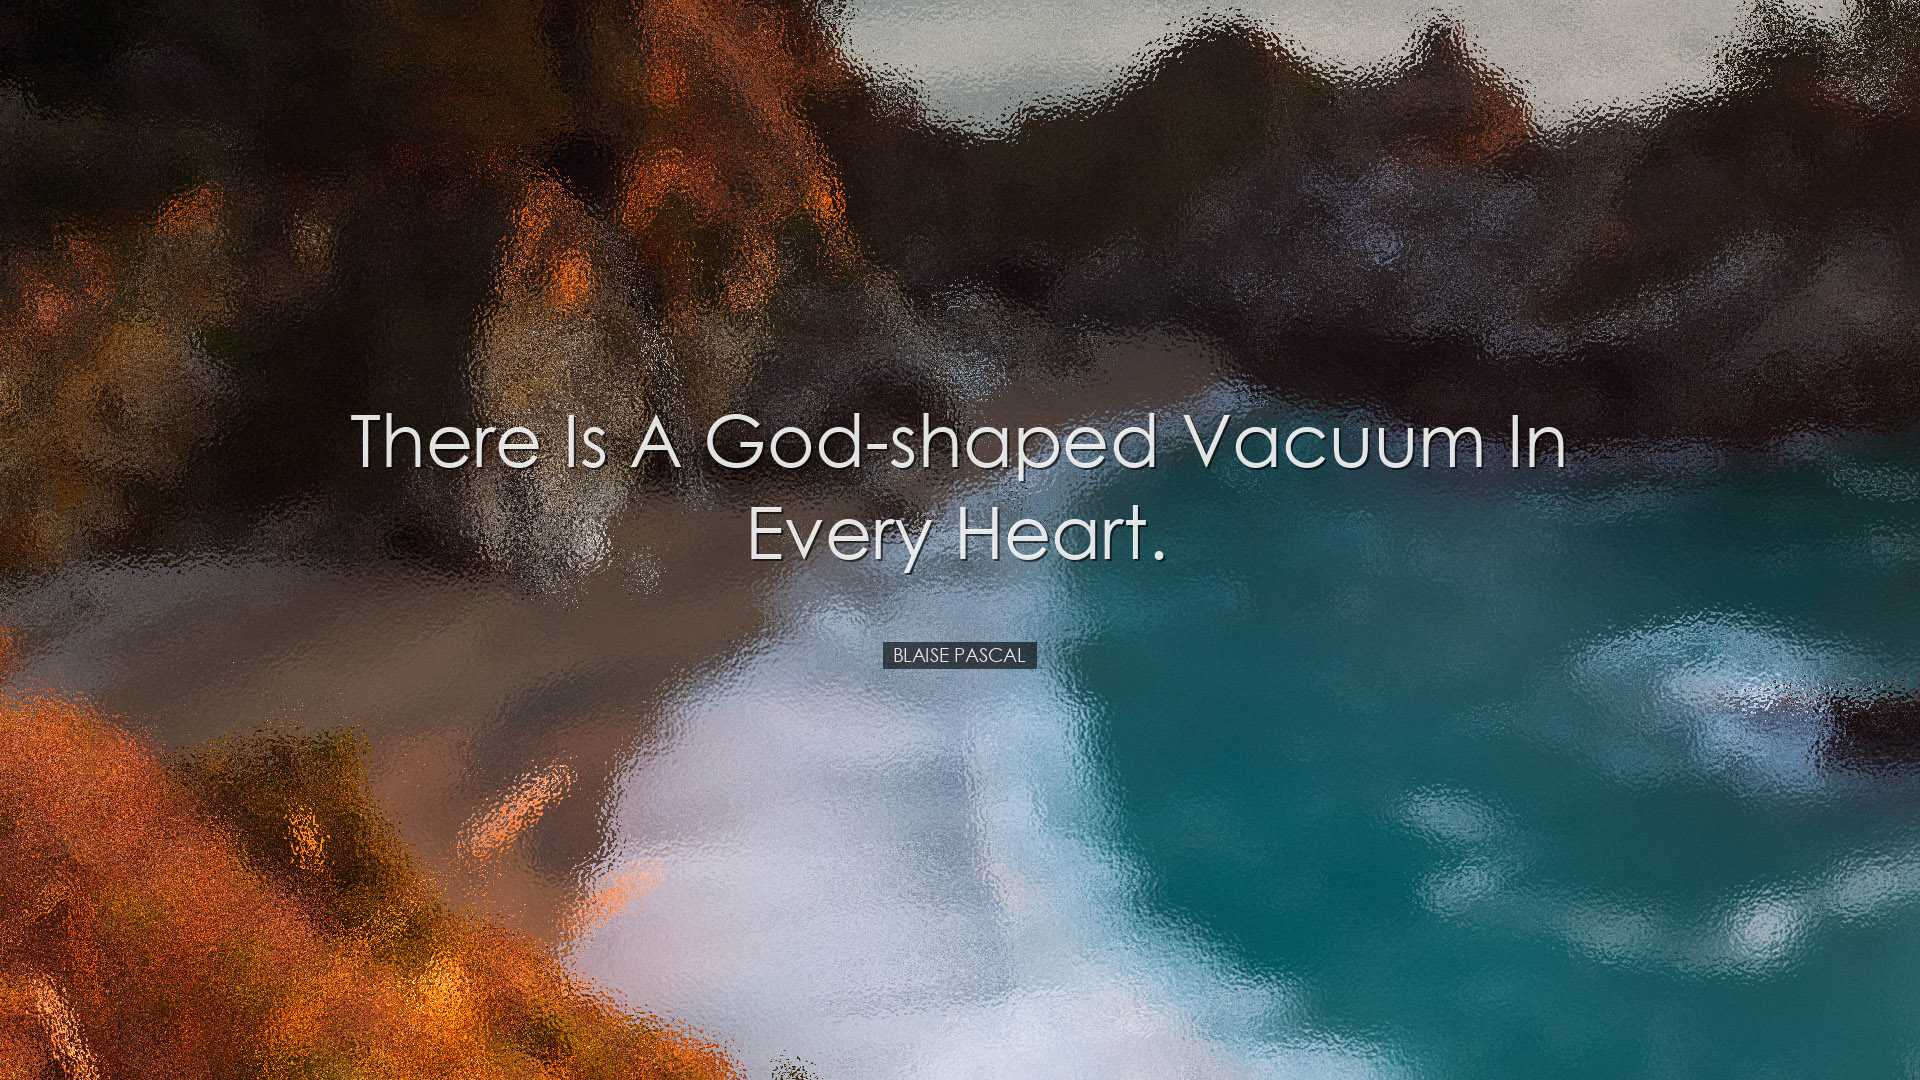 There is a God-shaped vacuum in every heart. - Blaise Pascal